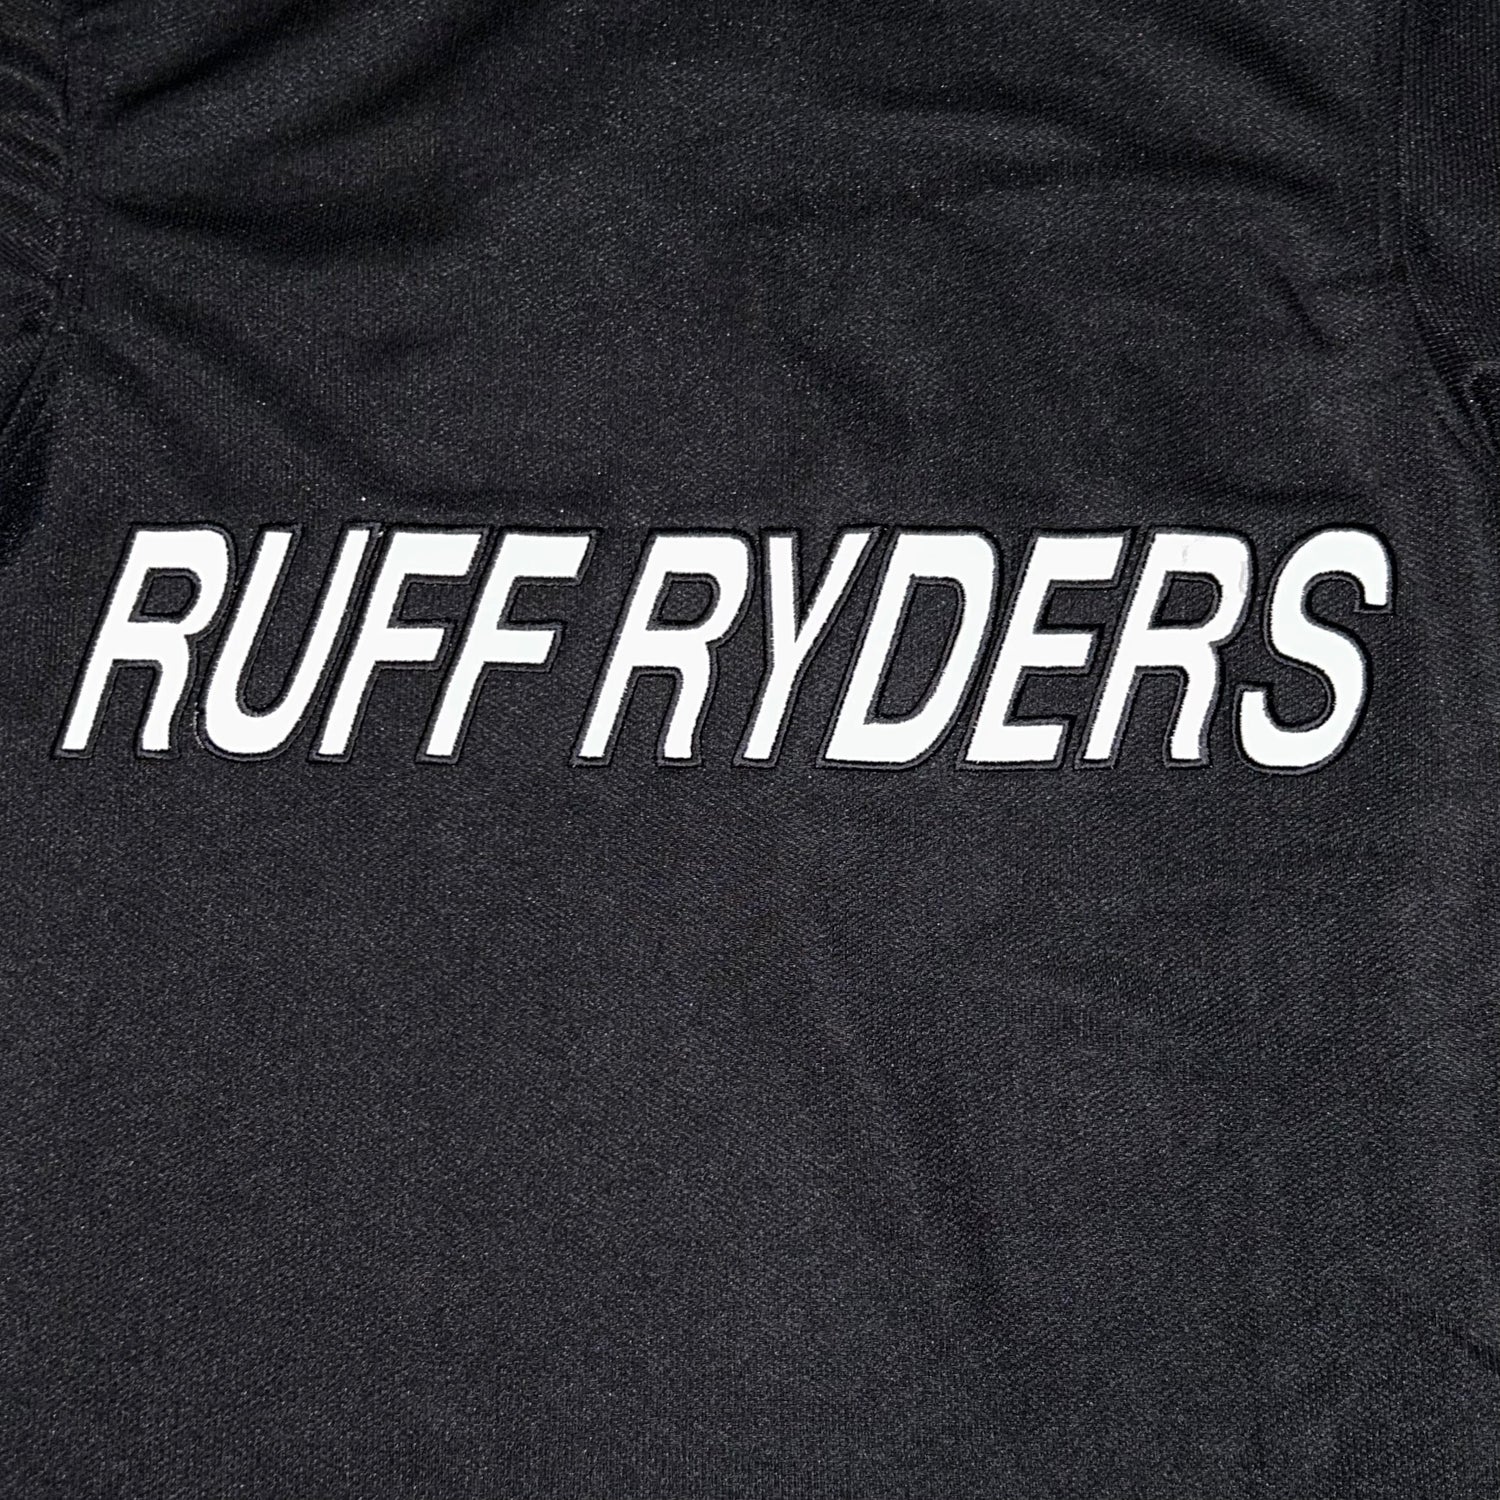 Jersey Ruff Ryders Vintage (S) - oldstyleclothing